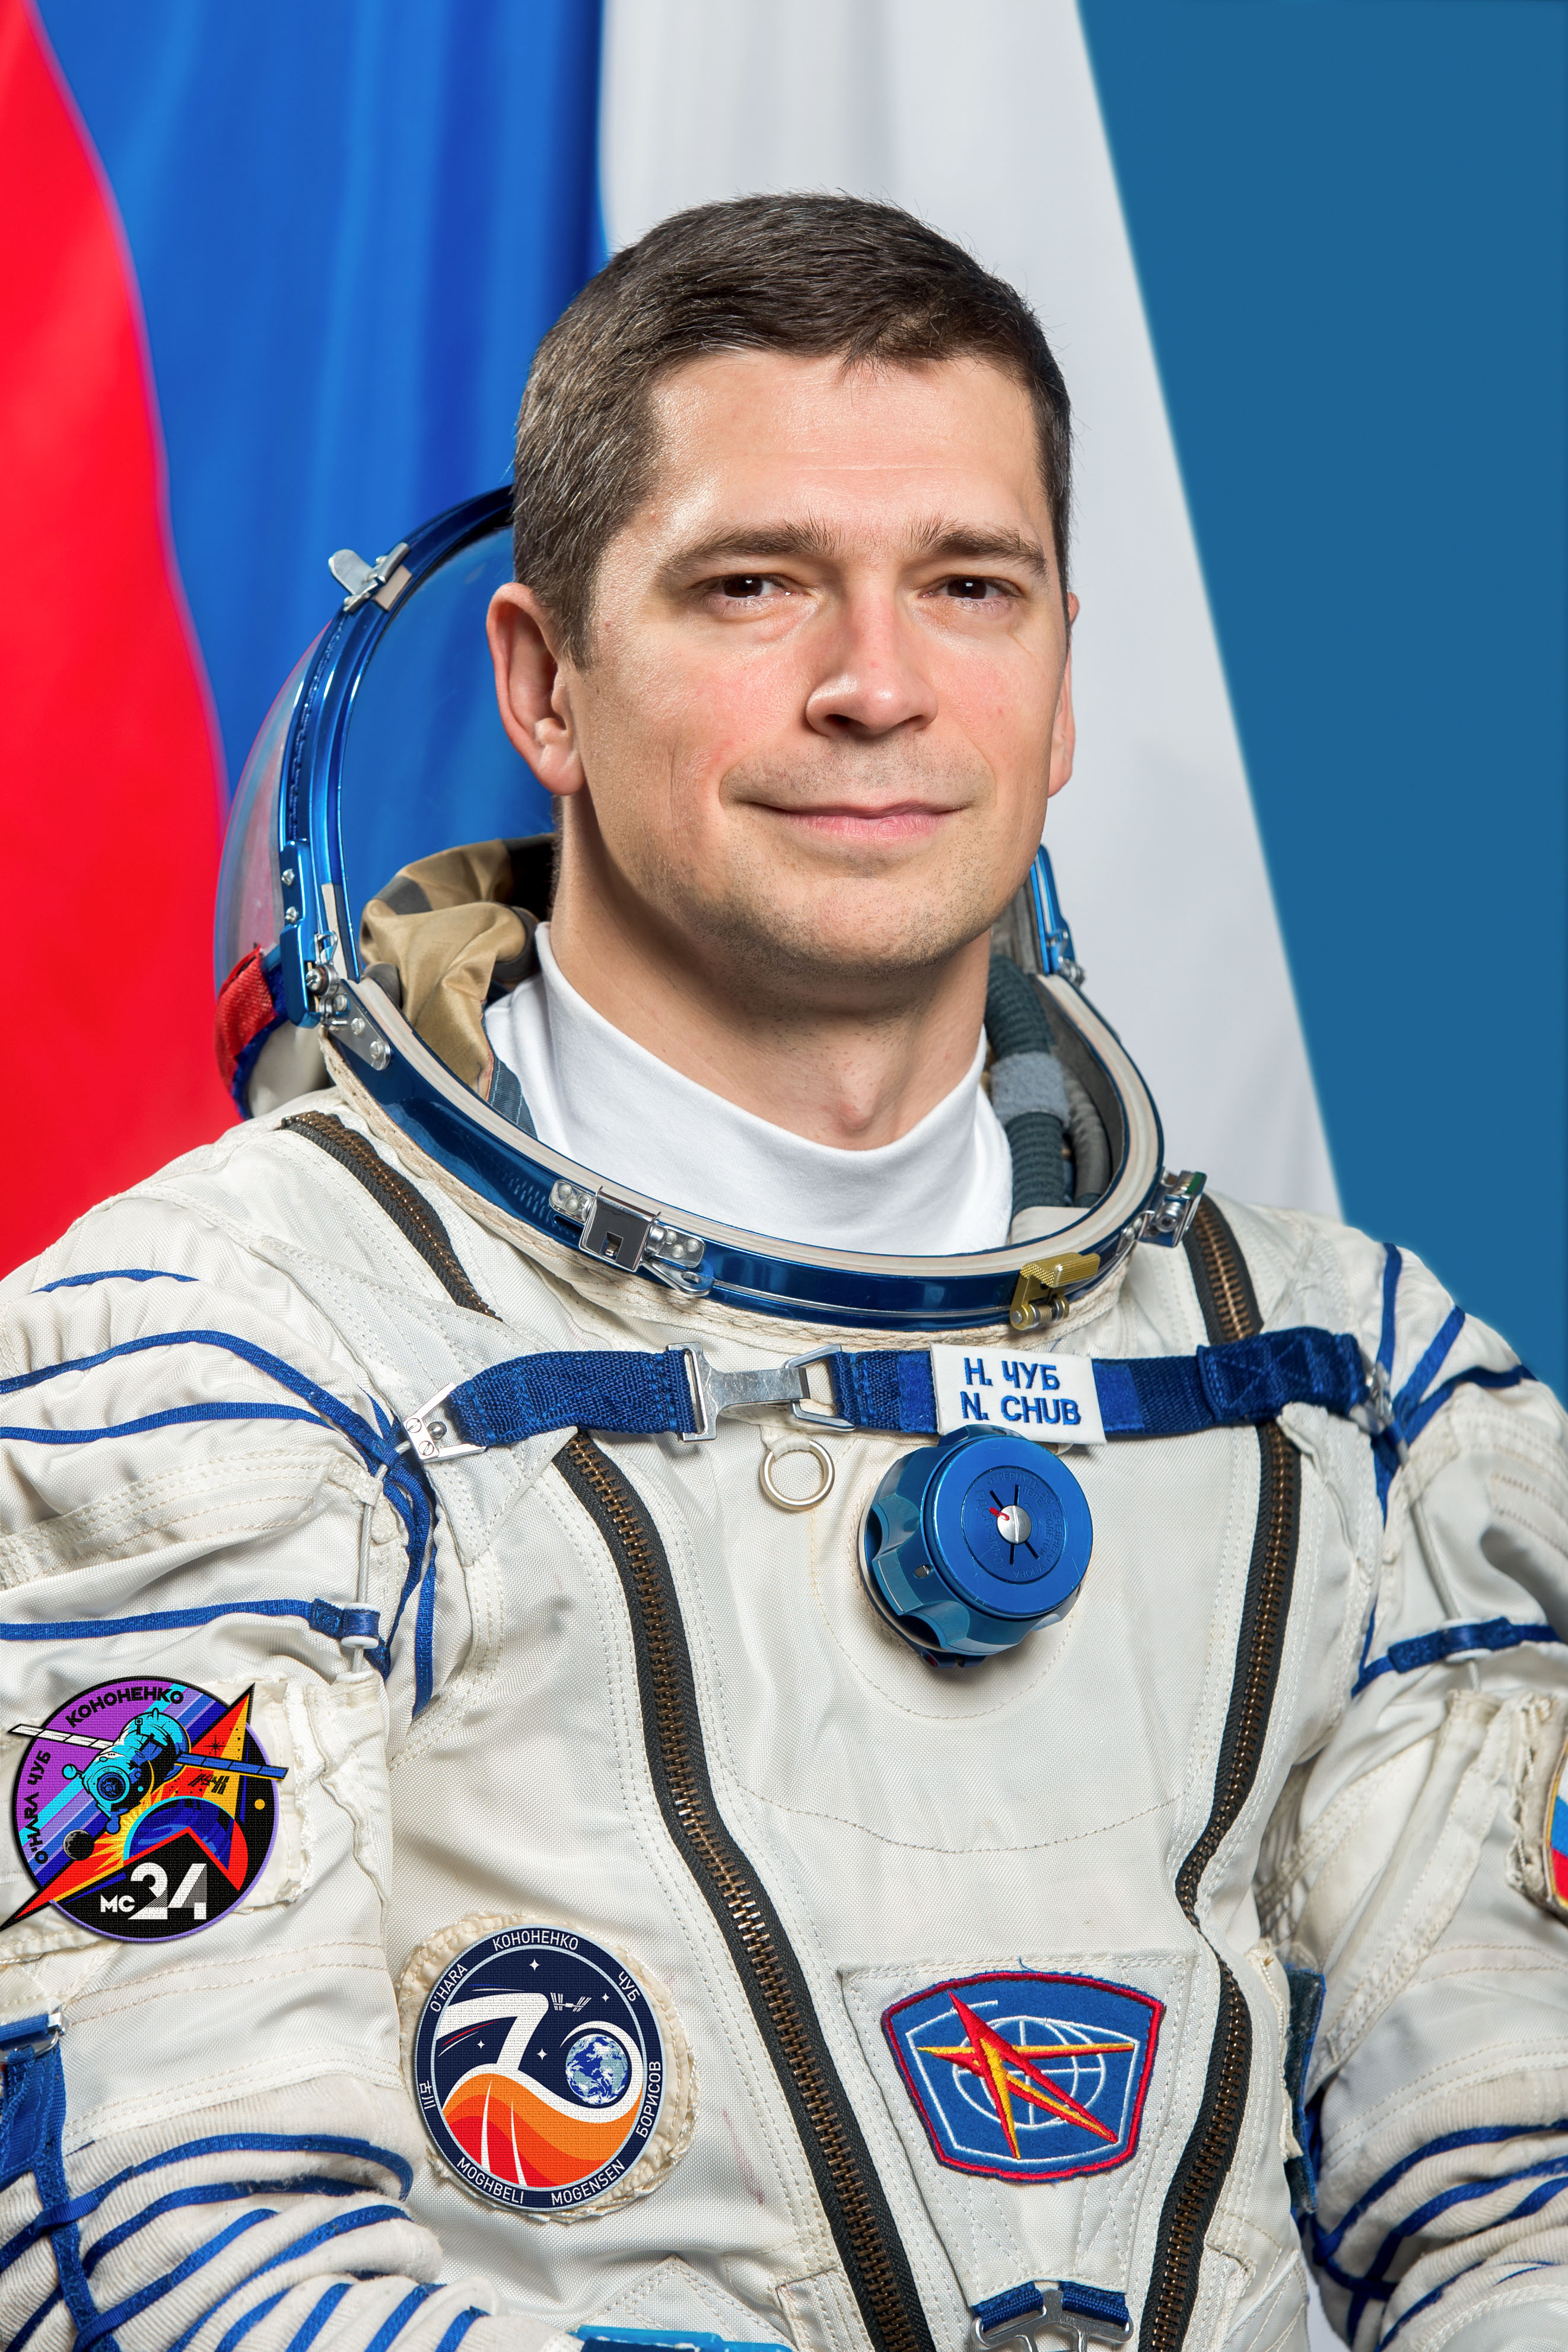 Roscosmos cosmonaut and Expedition 70 Flight Engineer Nikolai Chub poses for a portrait at the Gagarin Cosmonaut Training Center in Russia.